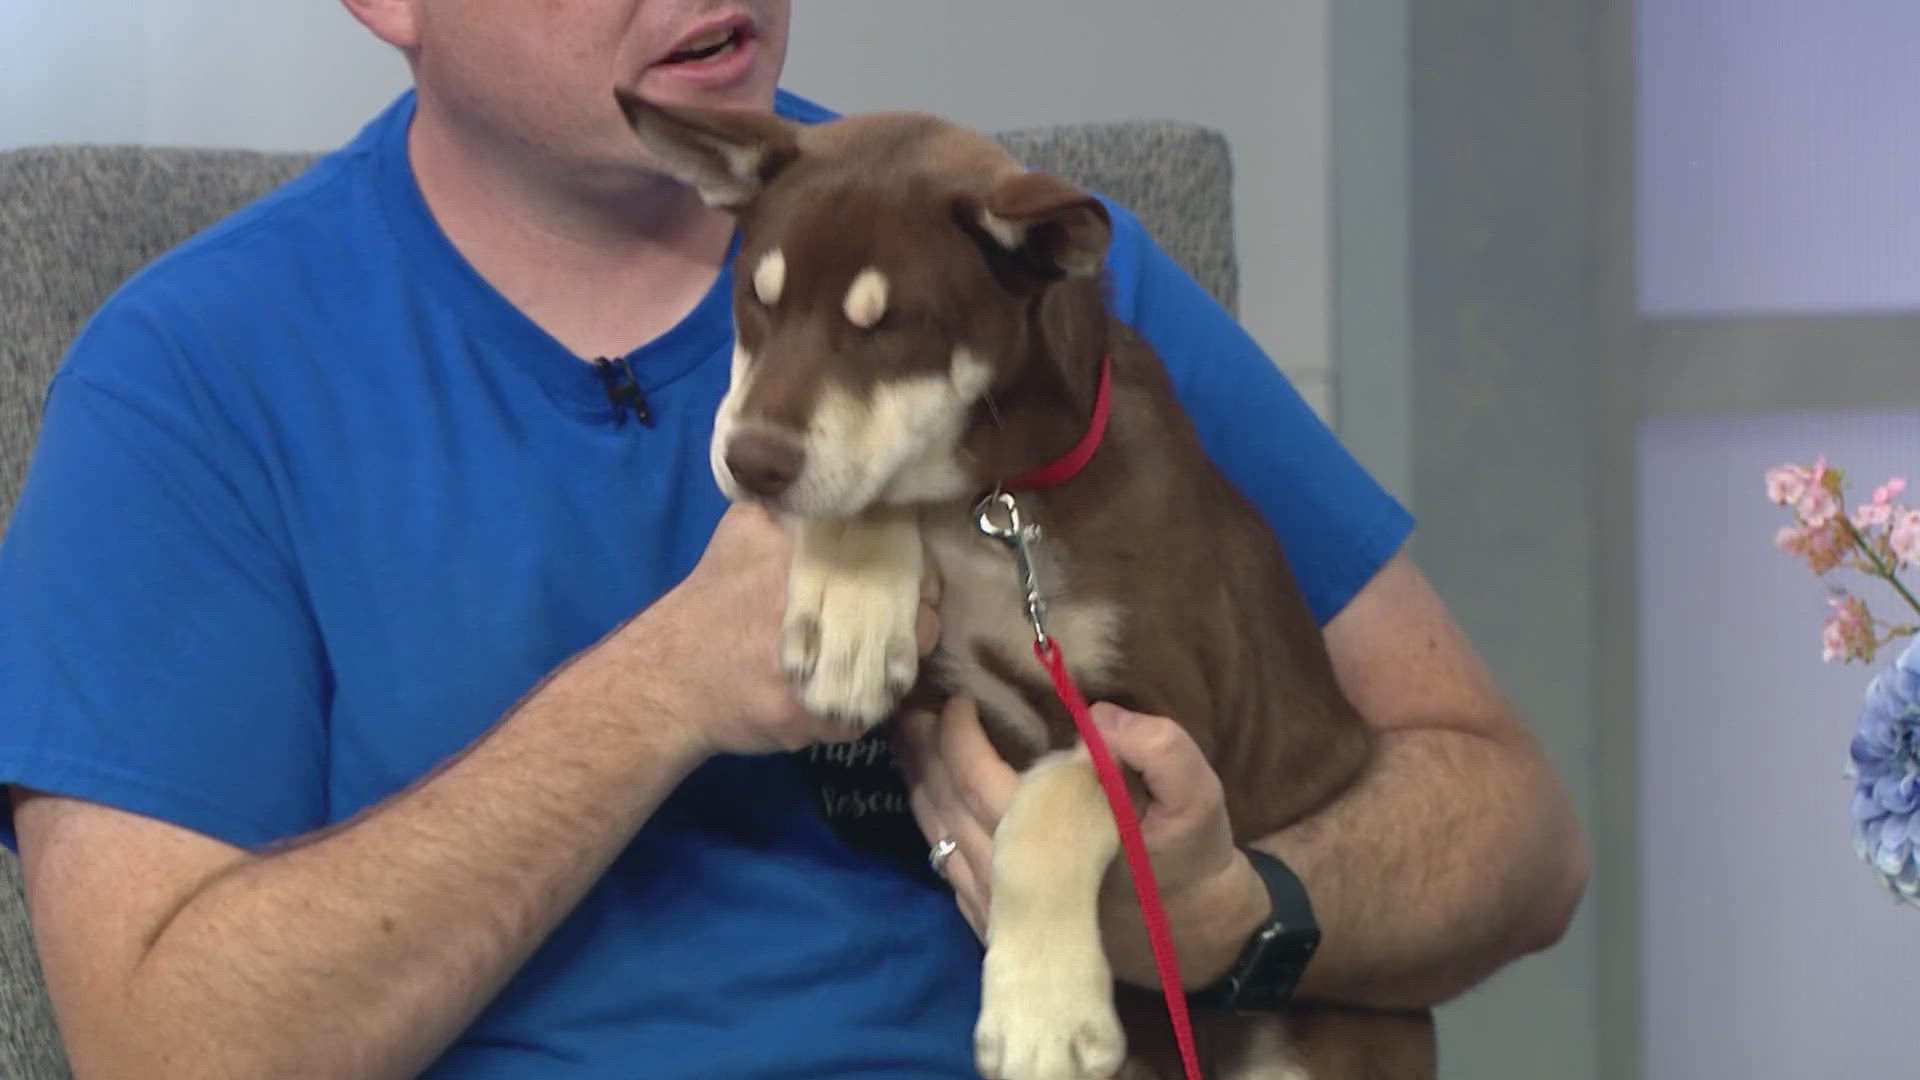 Teddy and 65 other puppies are available for adoption at Lifeline Puppy Rescue in Brighton.